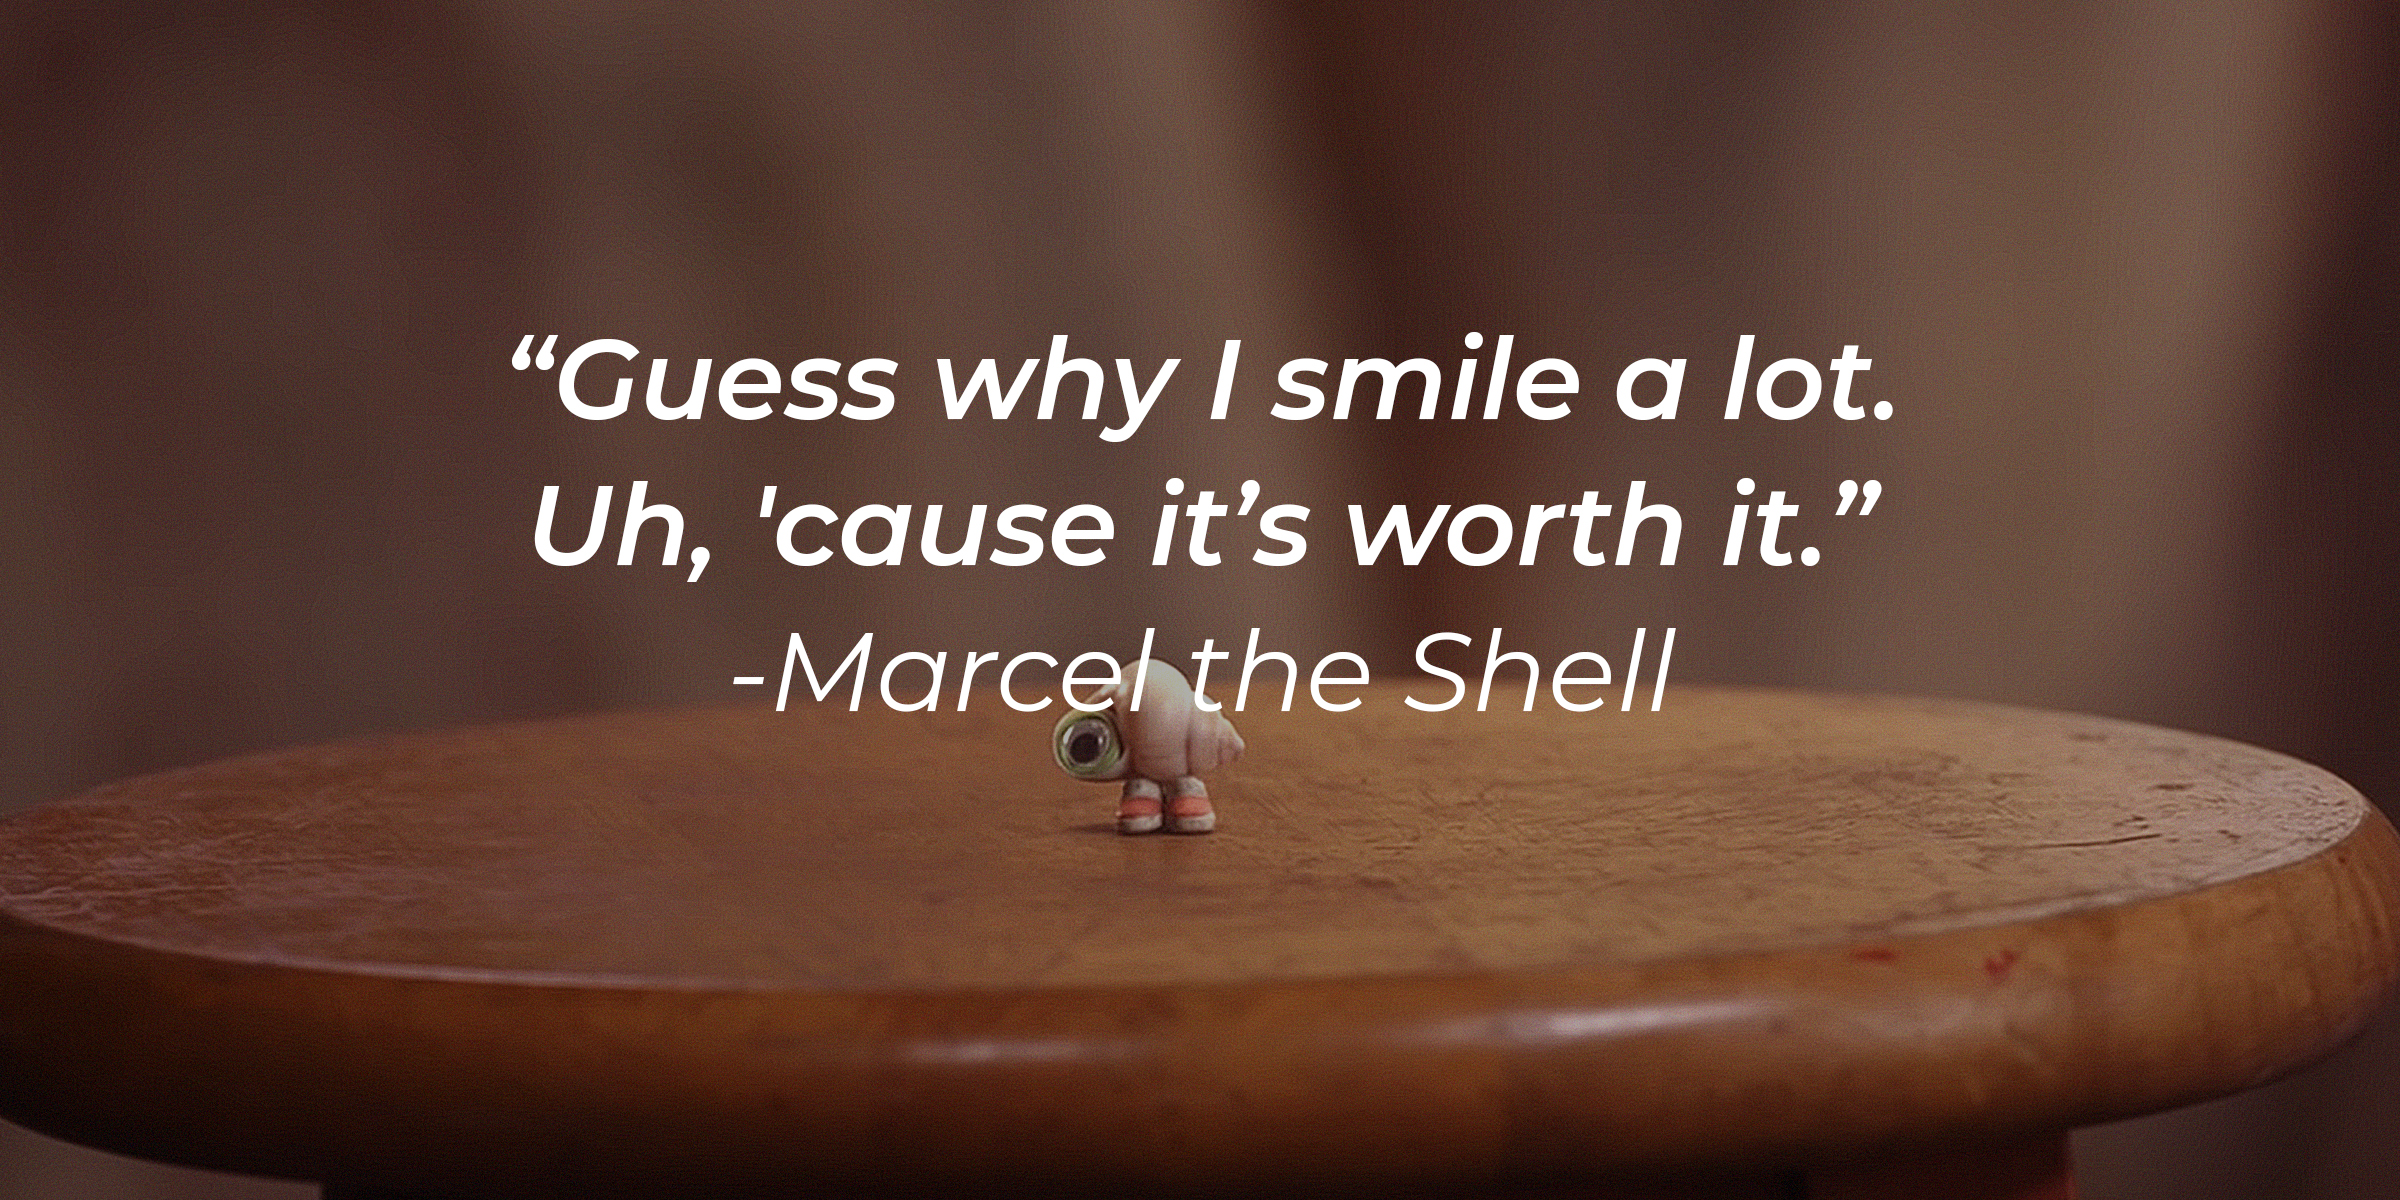 Marcel the Shell's quote: "Guess why I smile a lot. Uh, 'cause it’s worth it." | Source: youtube.com/A24